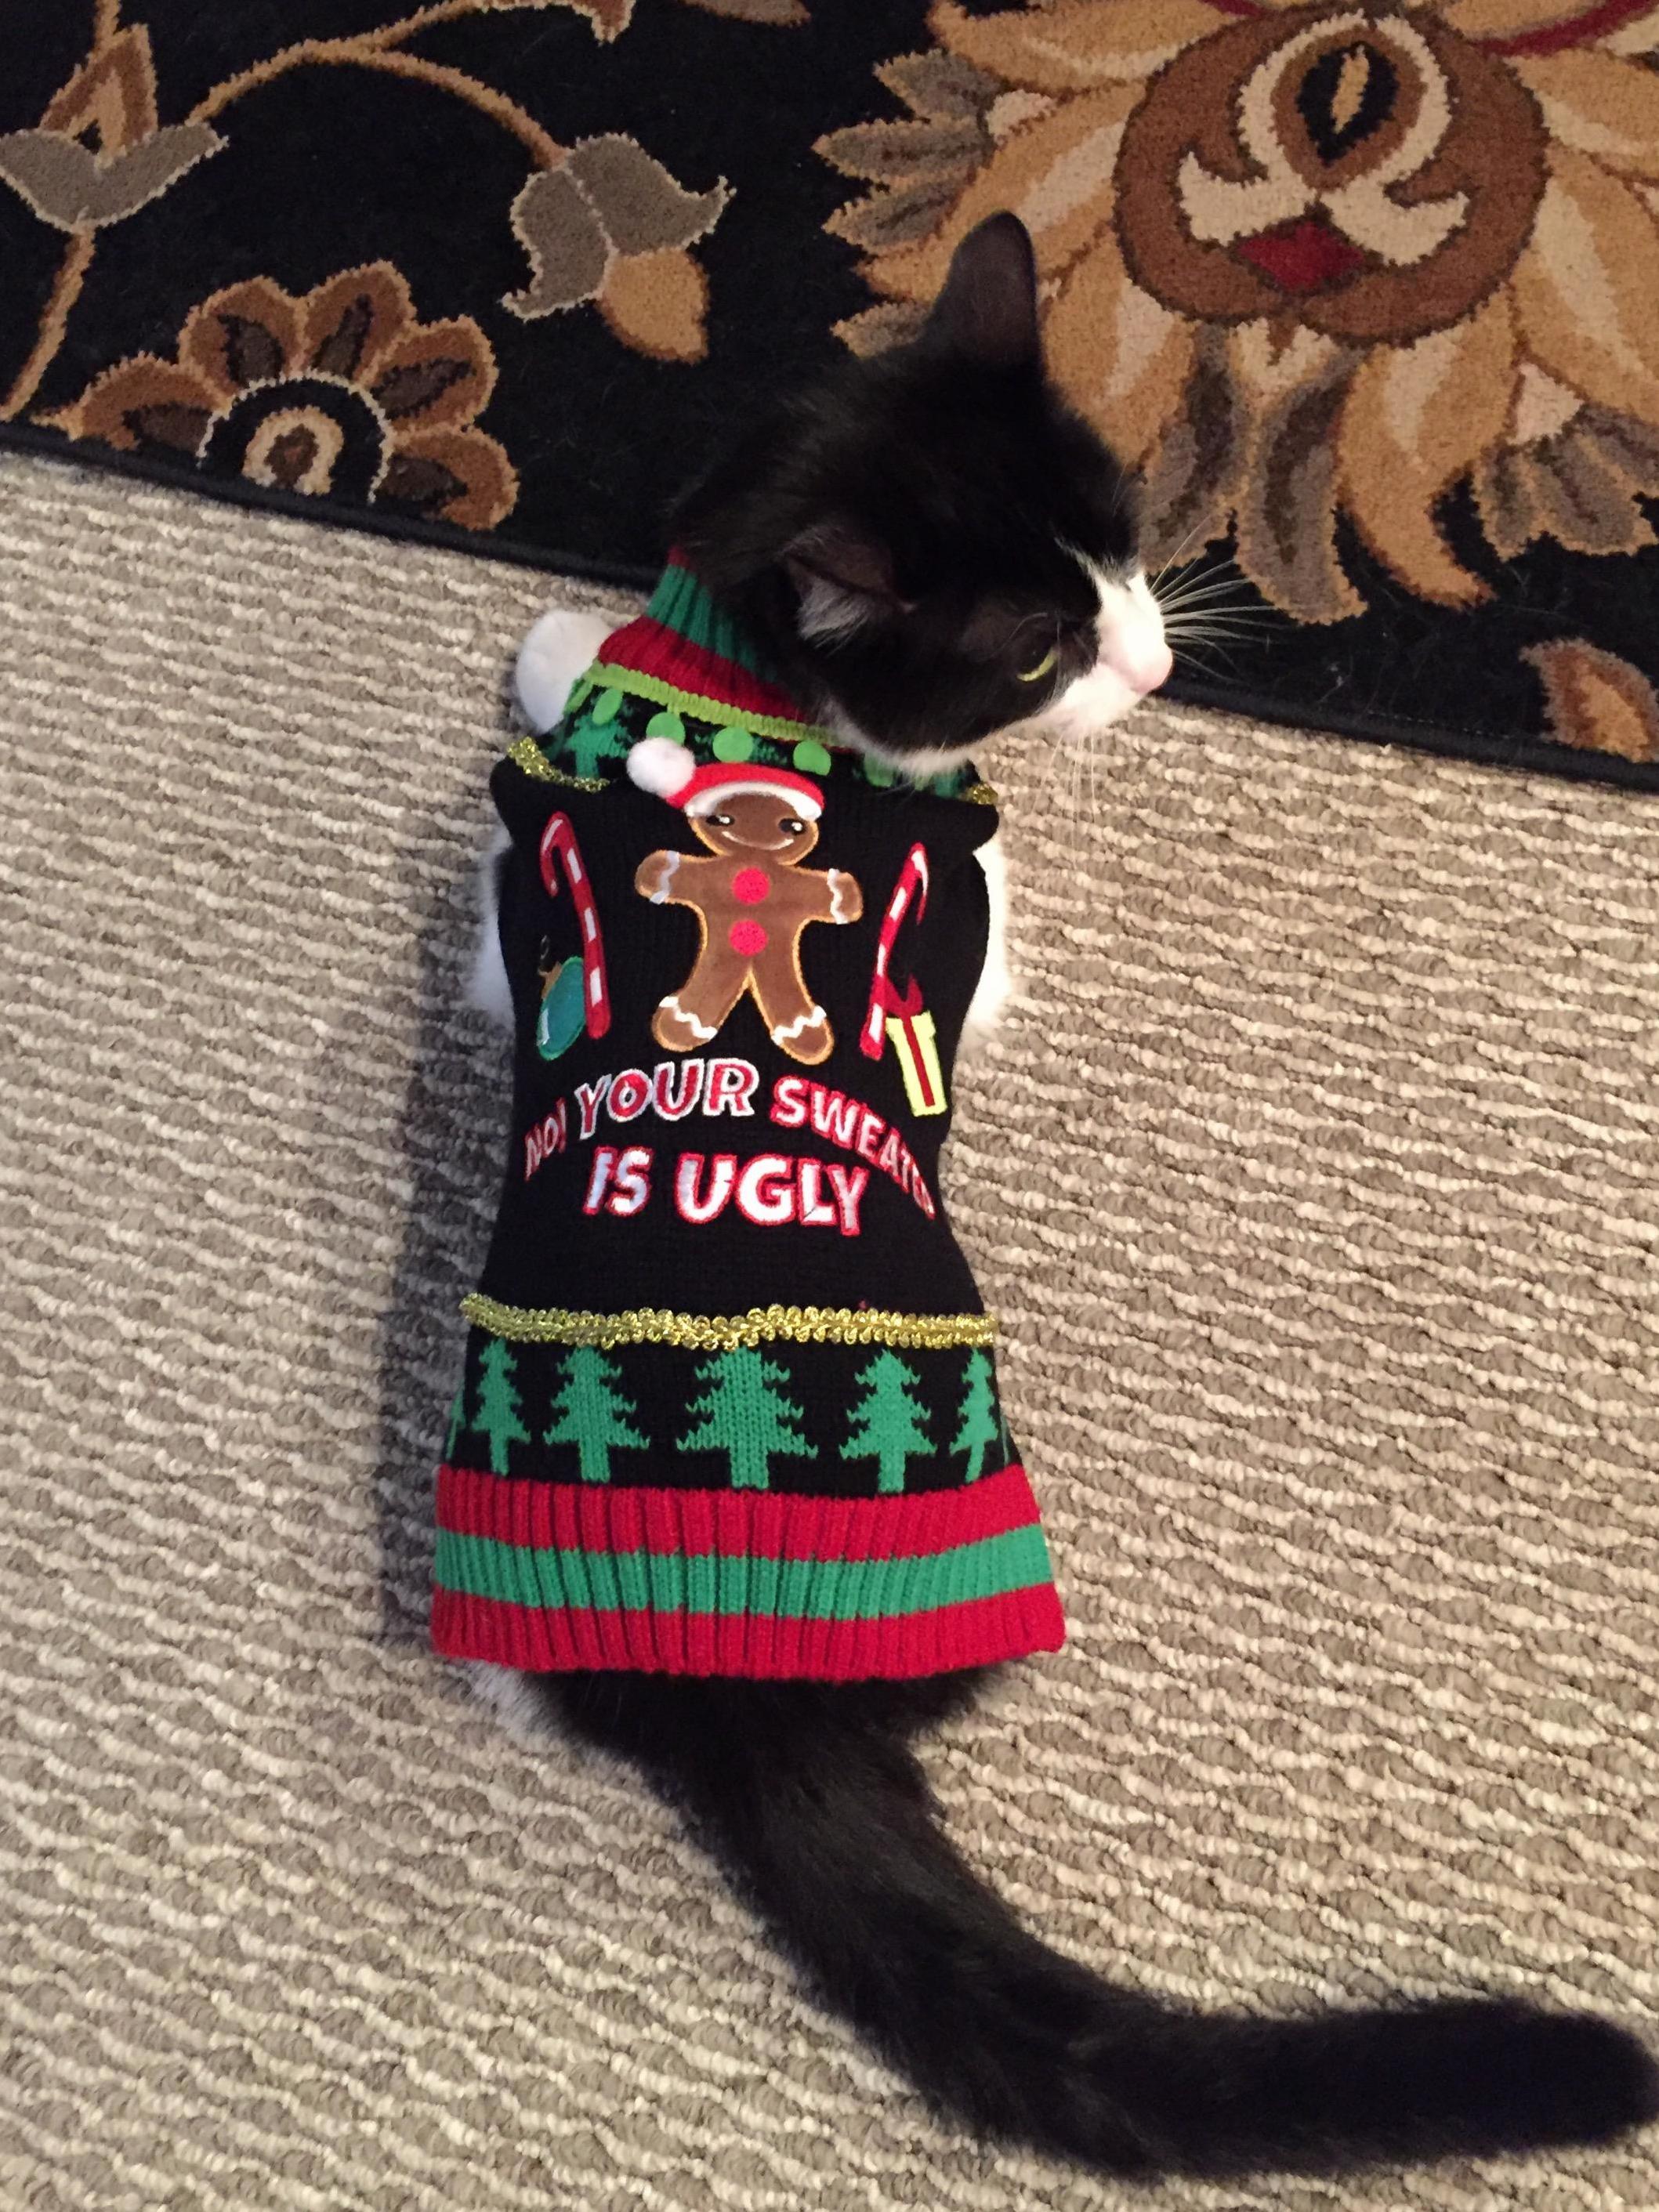 My cat wins the ugly christmas sweater contest.